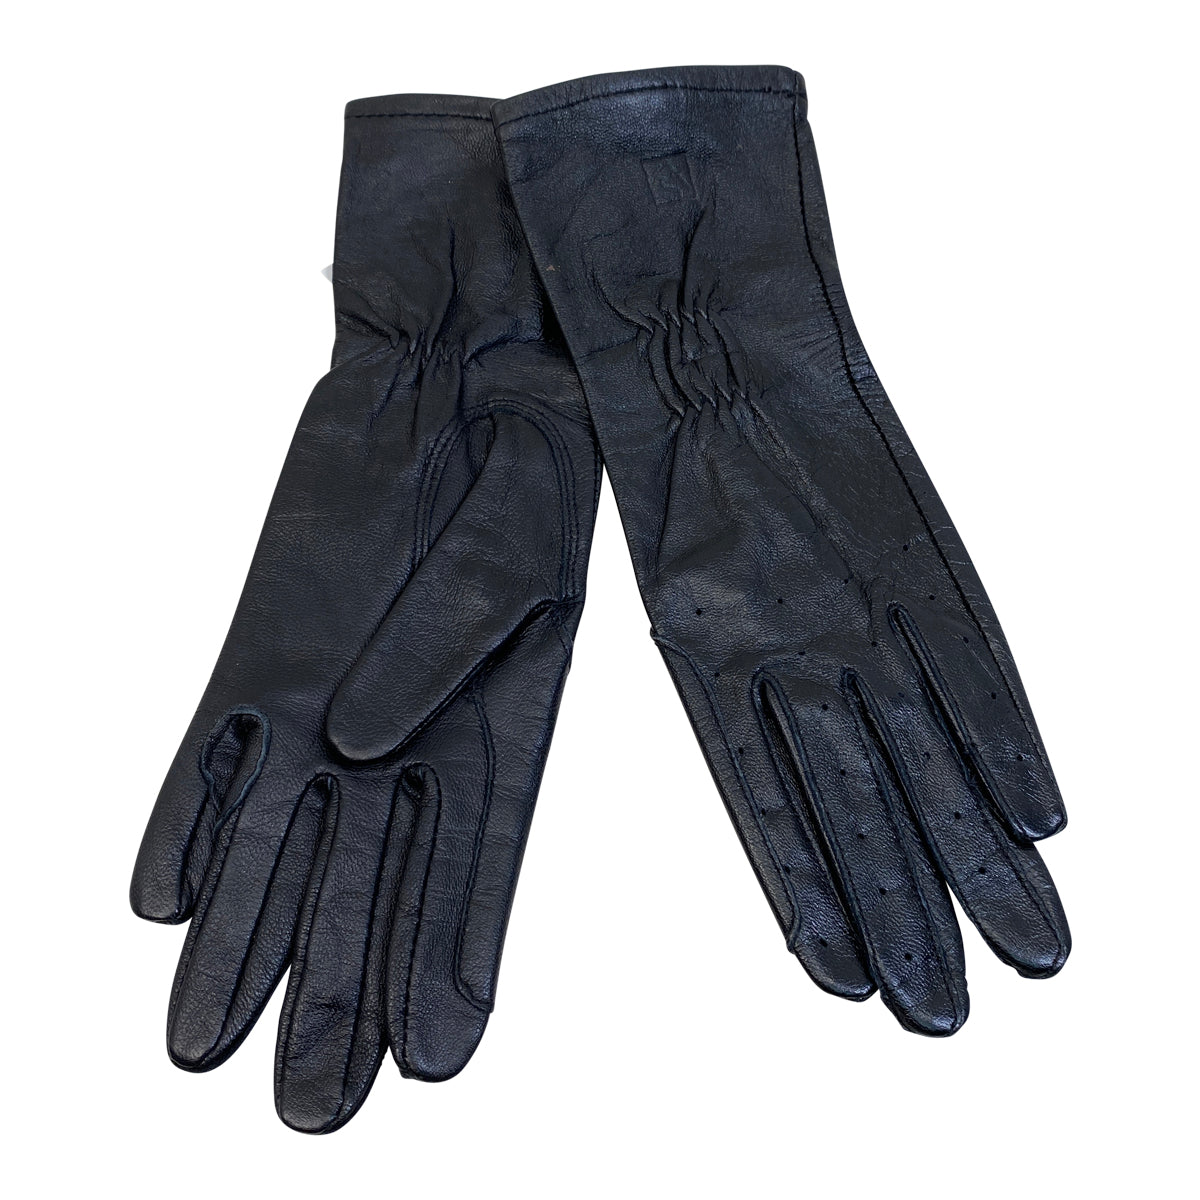 SSG Long Cuff Leather Show Gloves in Black